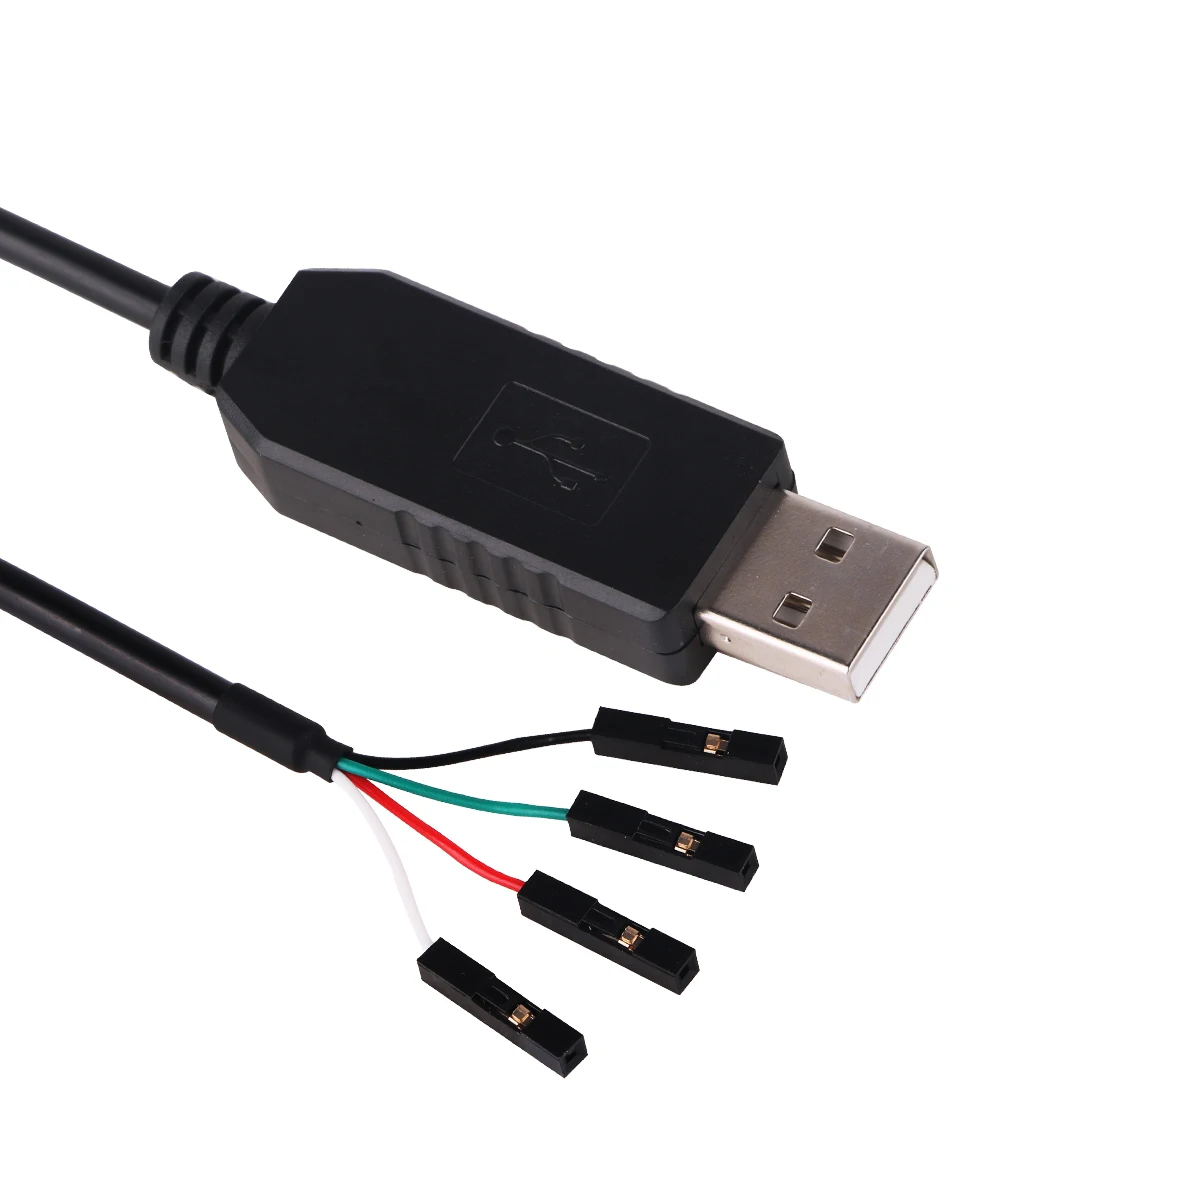 FTDI TTL-232R TTL TO USB 4-Way SIL,0.1” 2.54mm Pitch 4 Pin Terminal Block Adapter Connector Serial Converter Cable ftdi usb ttl 232r 3 3v 5v 6 way wire end connector serial ttl uart level converter data transmission cable